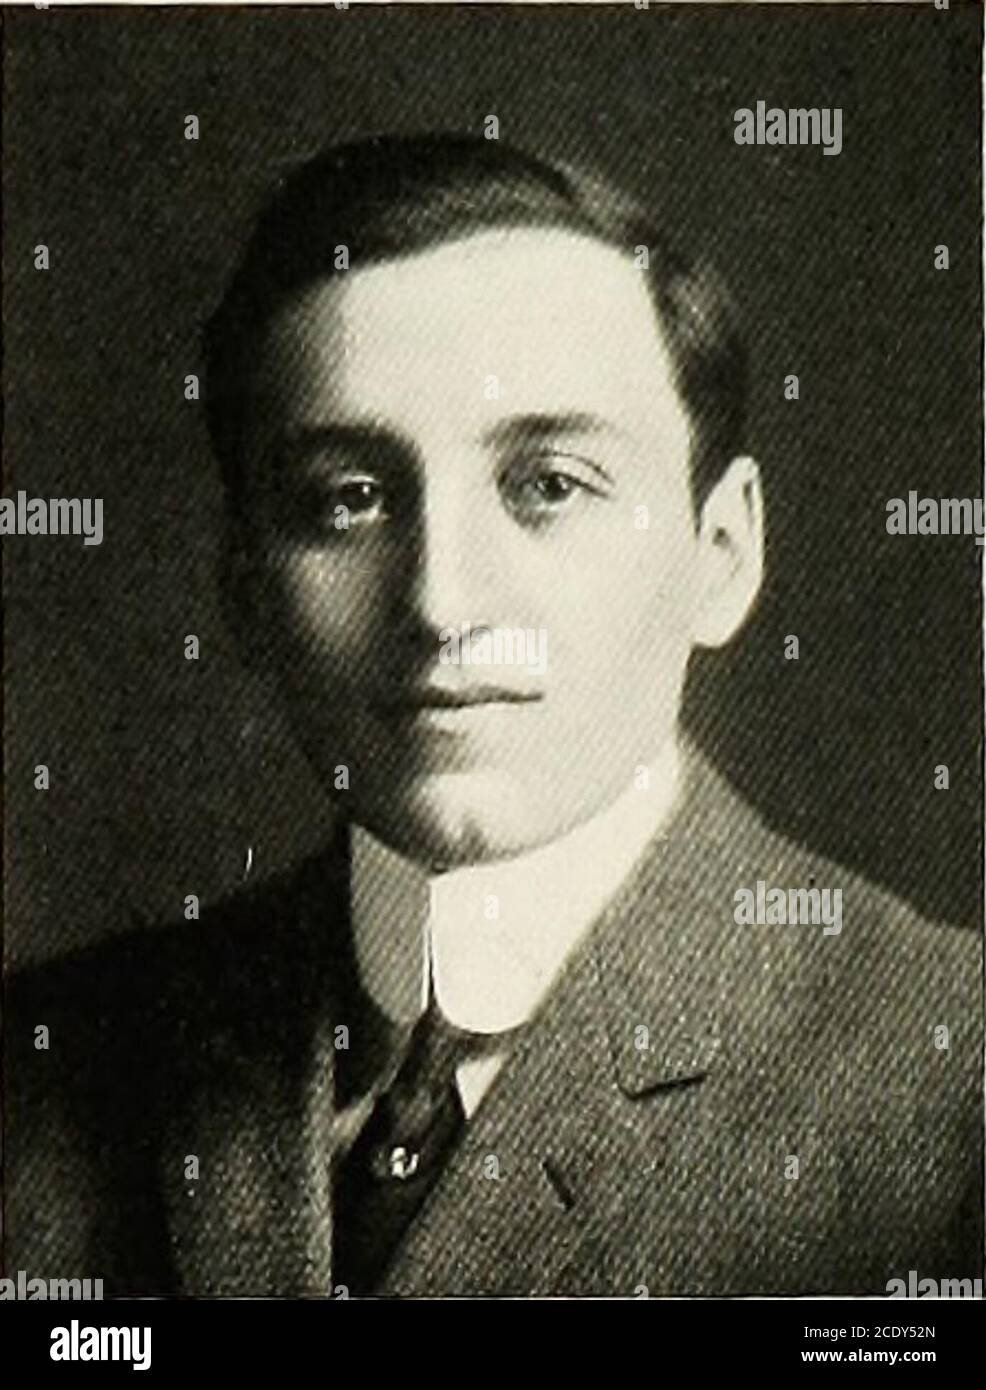 . History of the class of 1911 : Medical Department of Yale University . GEORGE FRANCIS CAHILL.—Ramonje. Born, January i, 1890,New Haven, Conn. Single. Present Illness.—Patient complains of lo,ss of strength and difficultyin running. He is a member of Phi Rho Sigma Fraternity ; Skull and SceptreSociety; Students Medical Association Yale University ; Class Book Com-mittee. Past History.—This patient prepared at the New Haven High Schooland the Yale Summer School. He has always roomed at home. Family History.—ITis father is Thomas J. Cahill, employed with theCandee Rubber Company. Physical Exami Stock Photo